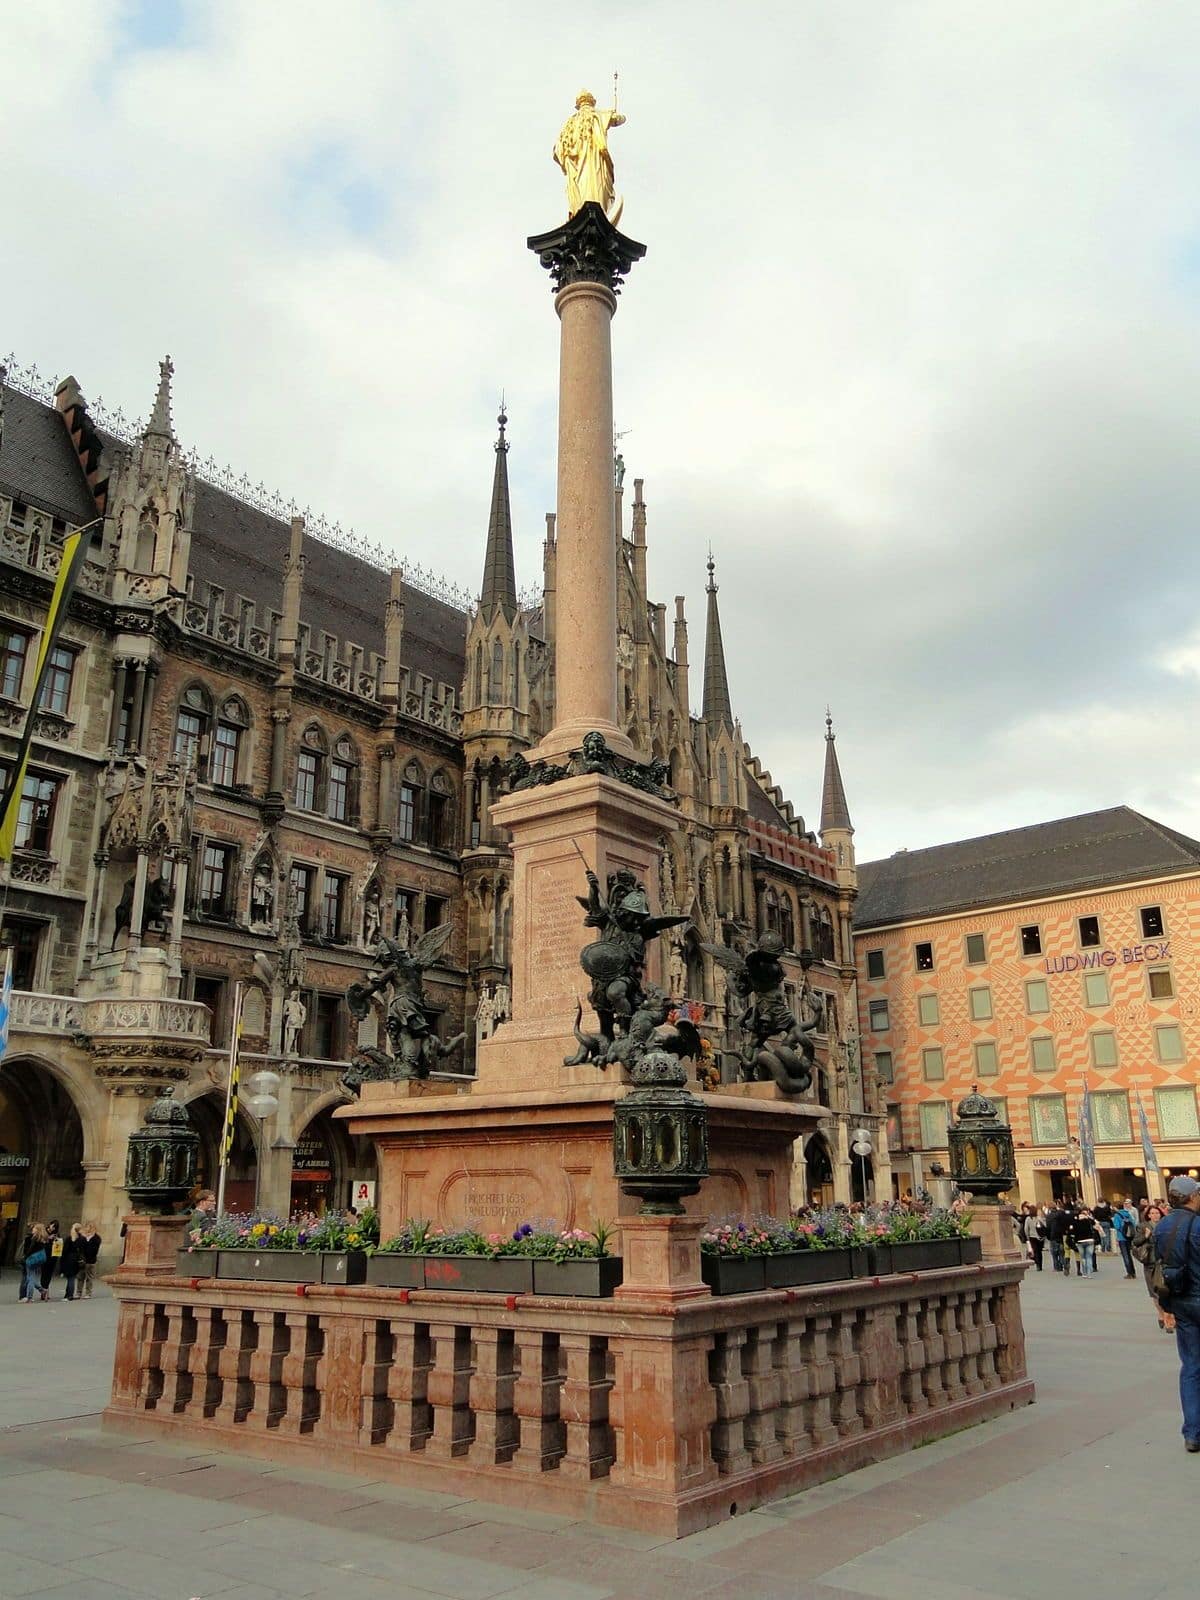 The Column of St. Mary